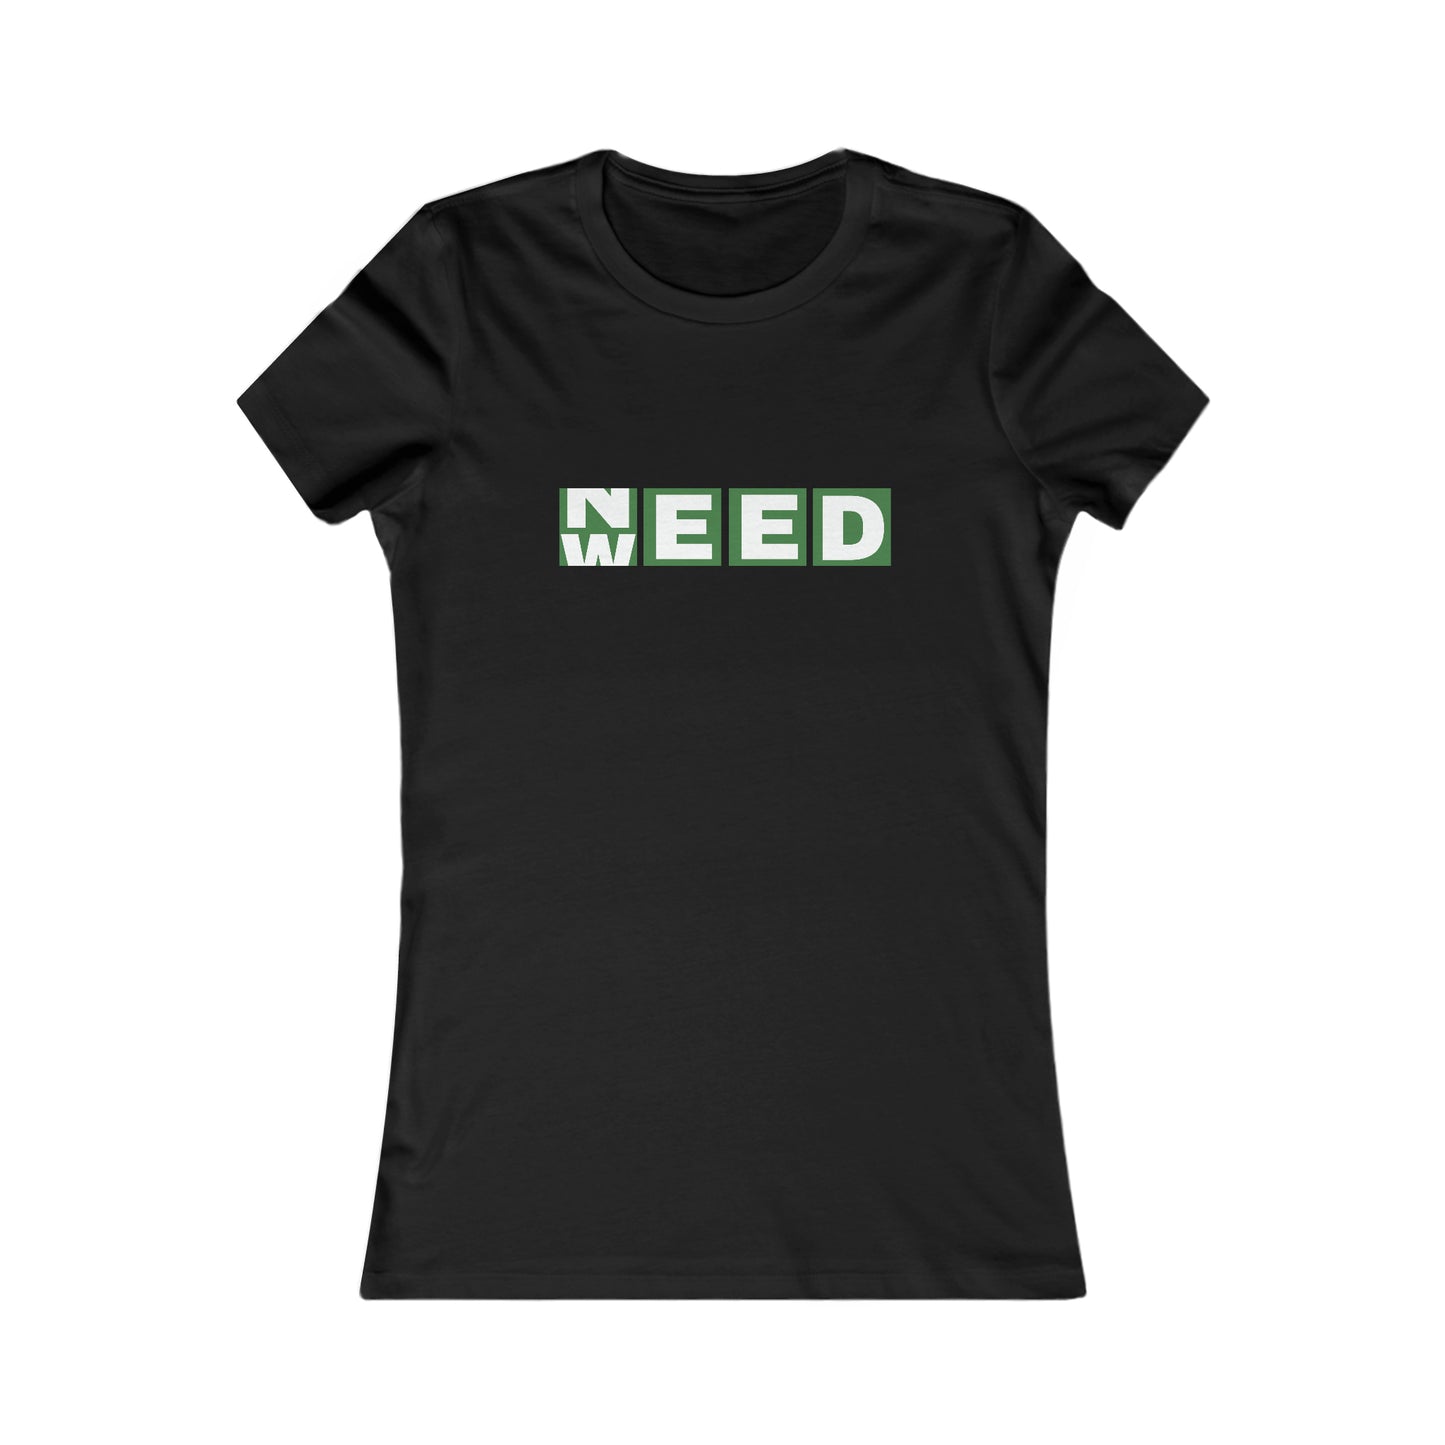 NWEED WOMEN'S T